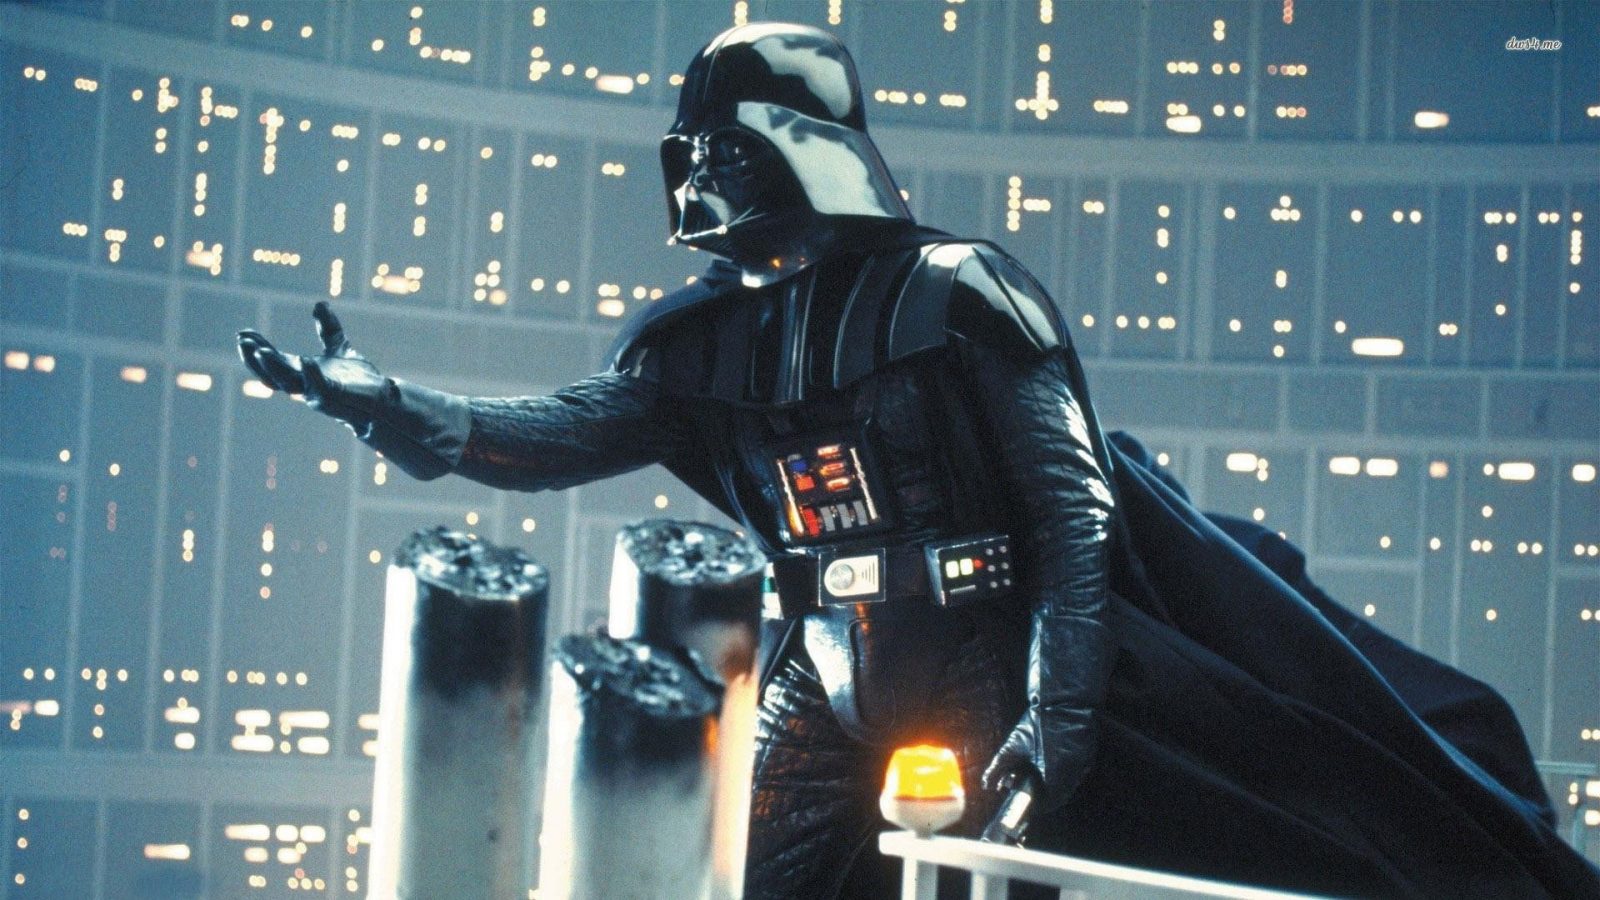 What Star Wars Alien Species Are You? Darth Vader 3 1920x1080